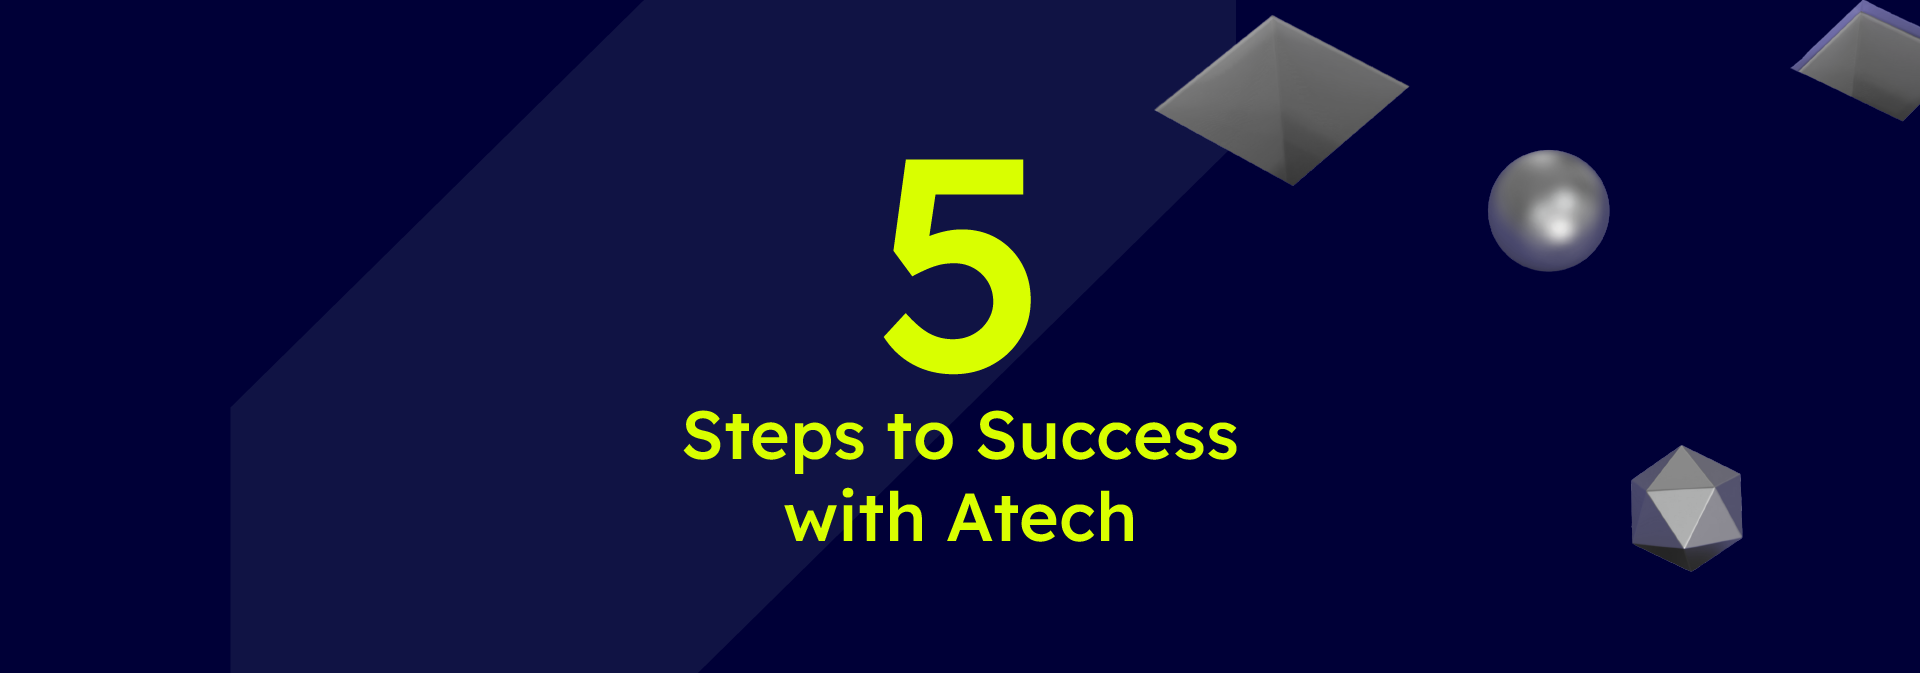 5 Steps to Success with Atech